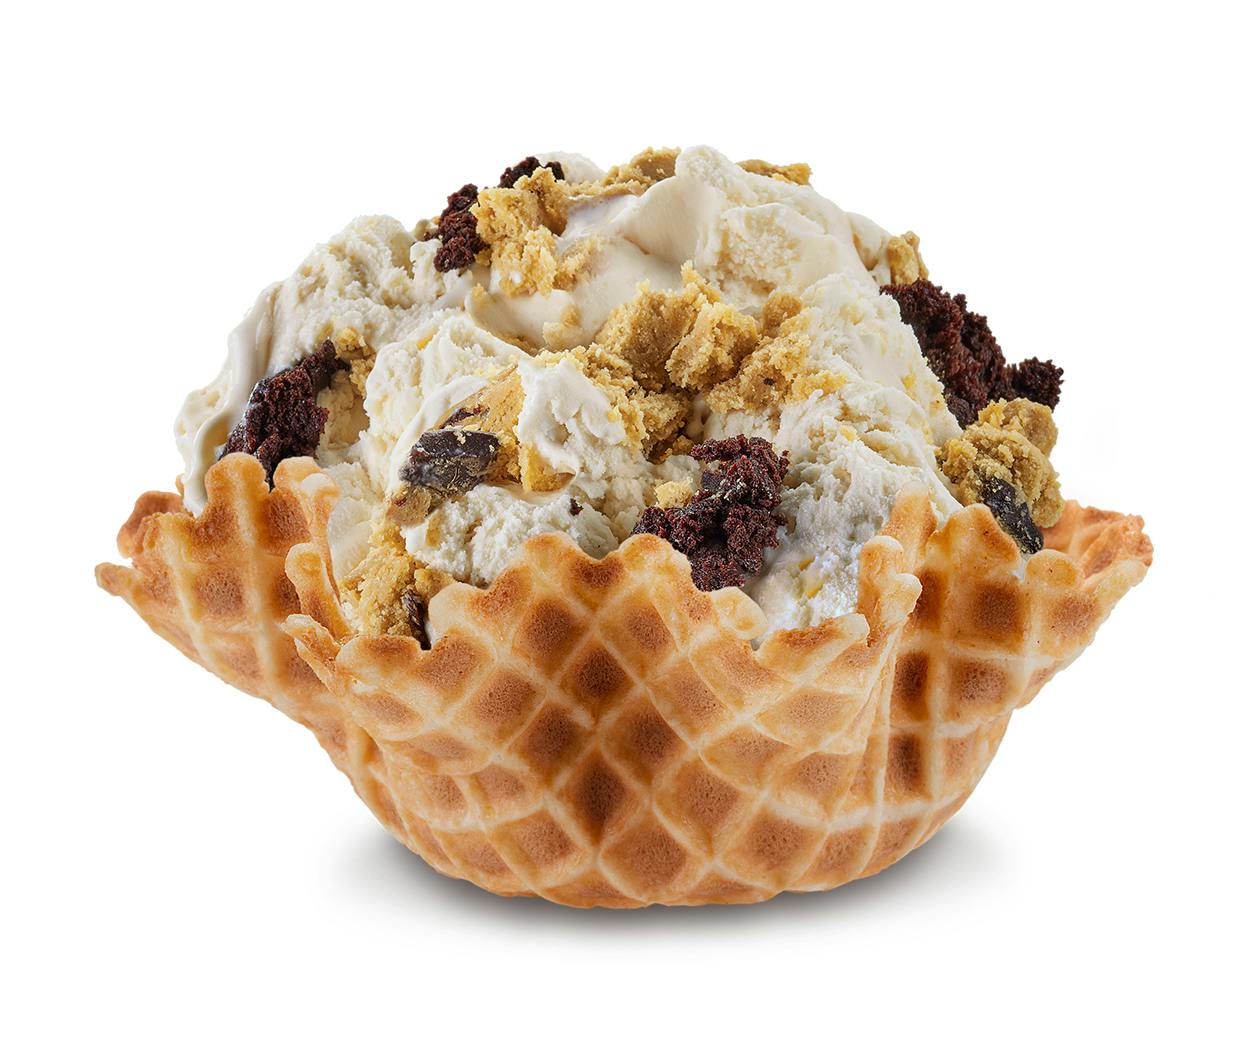 One Smart Brookie from Cold Stone Creamery - Green Bay in Green Bay, WI